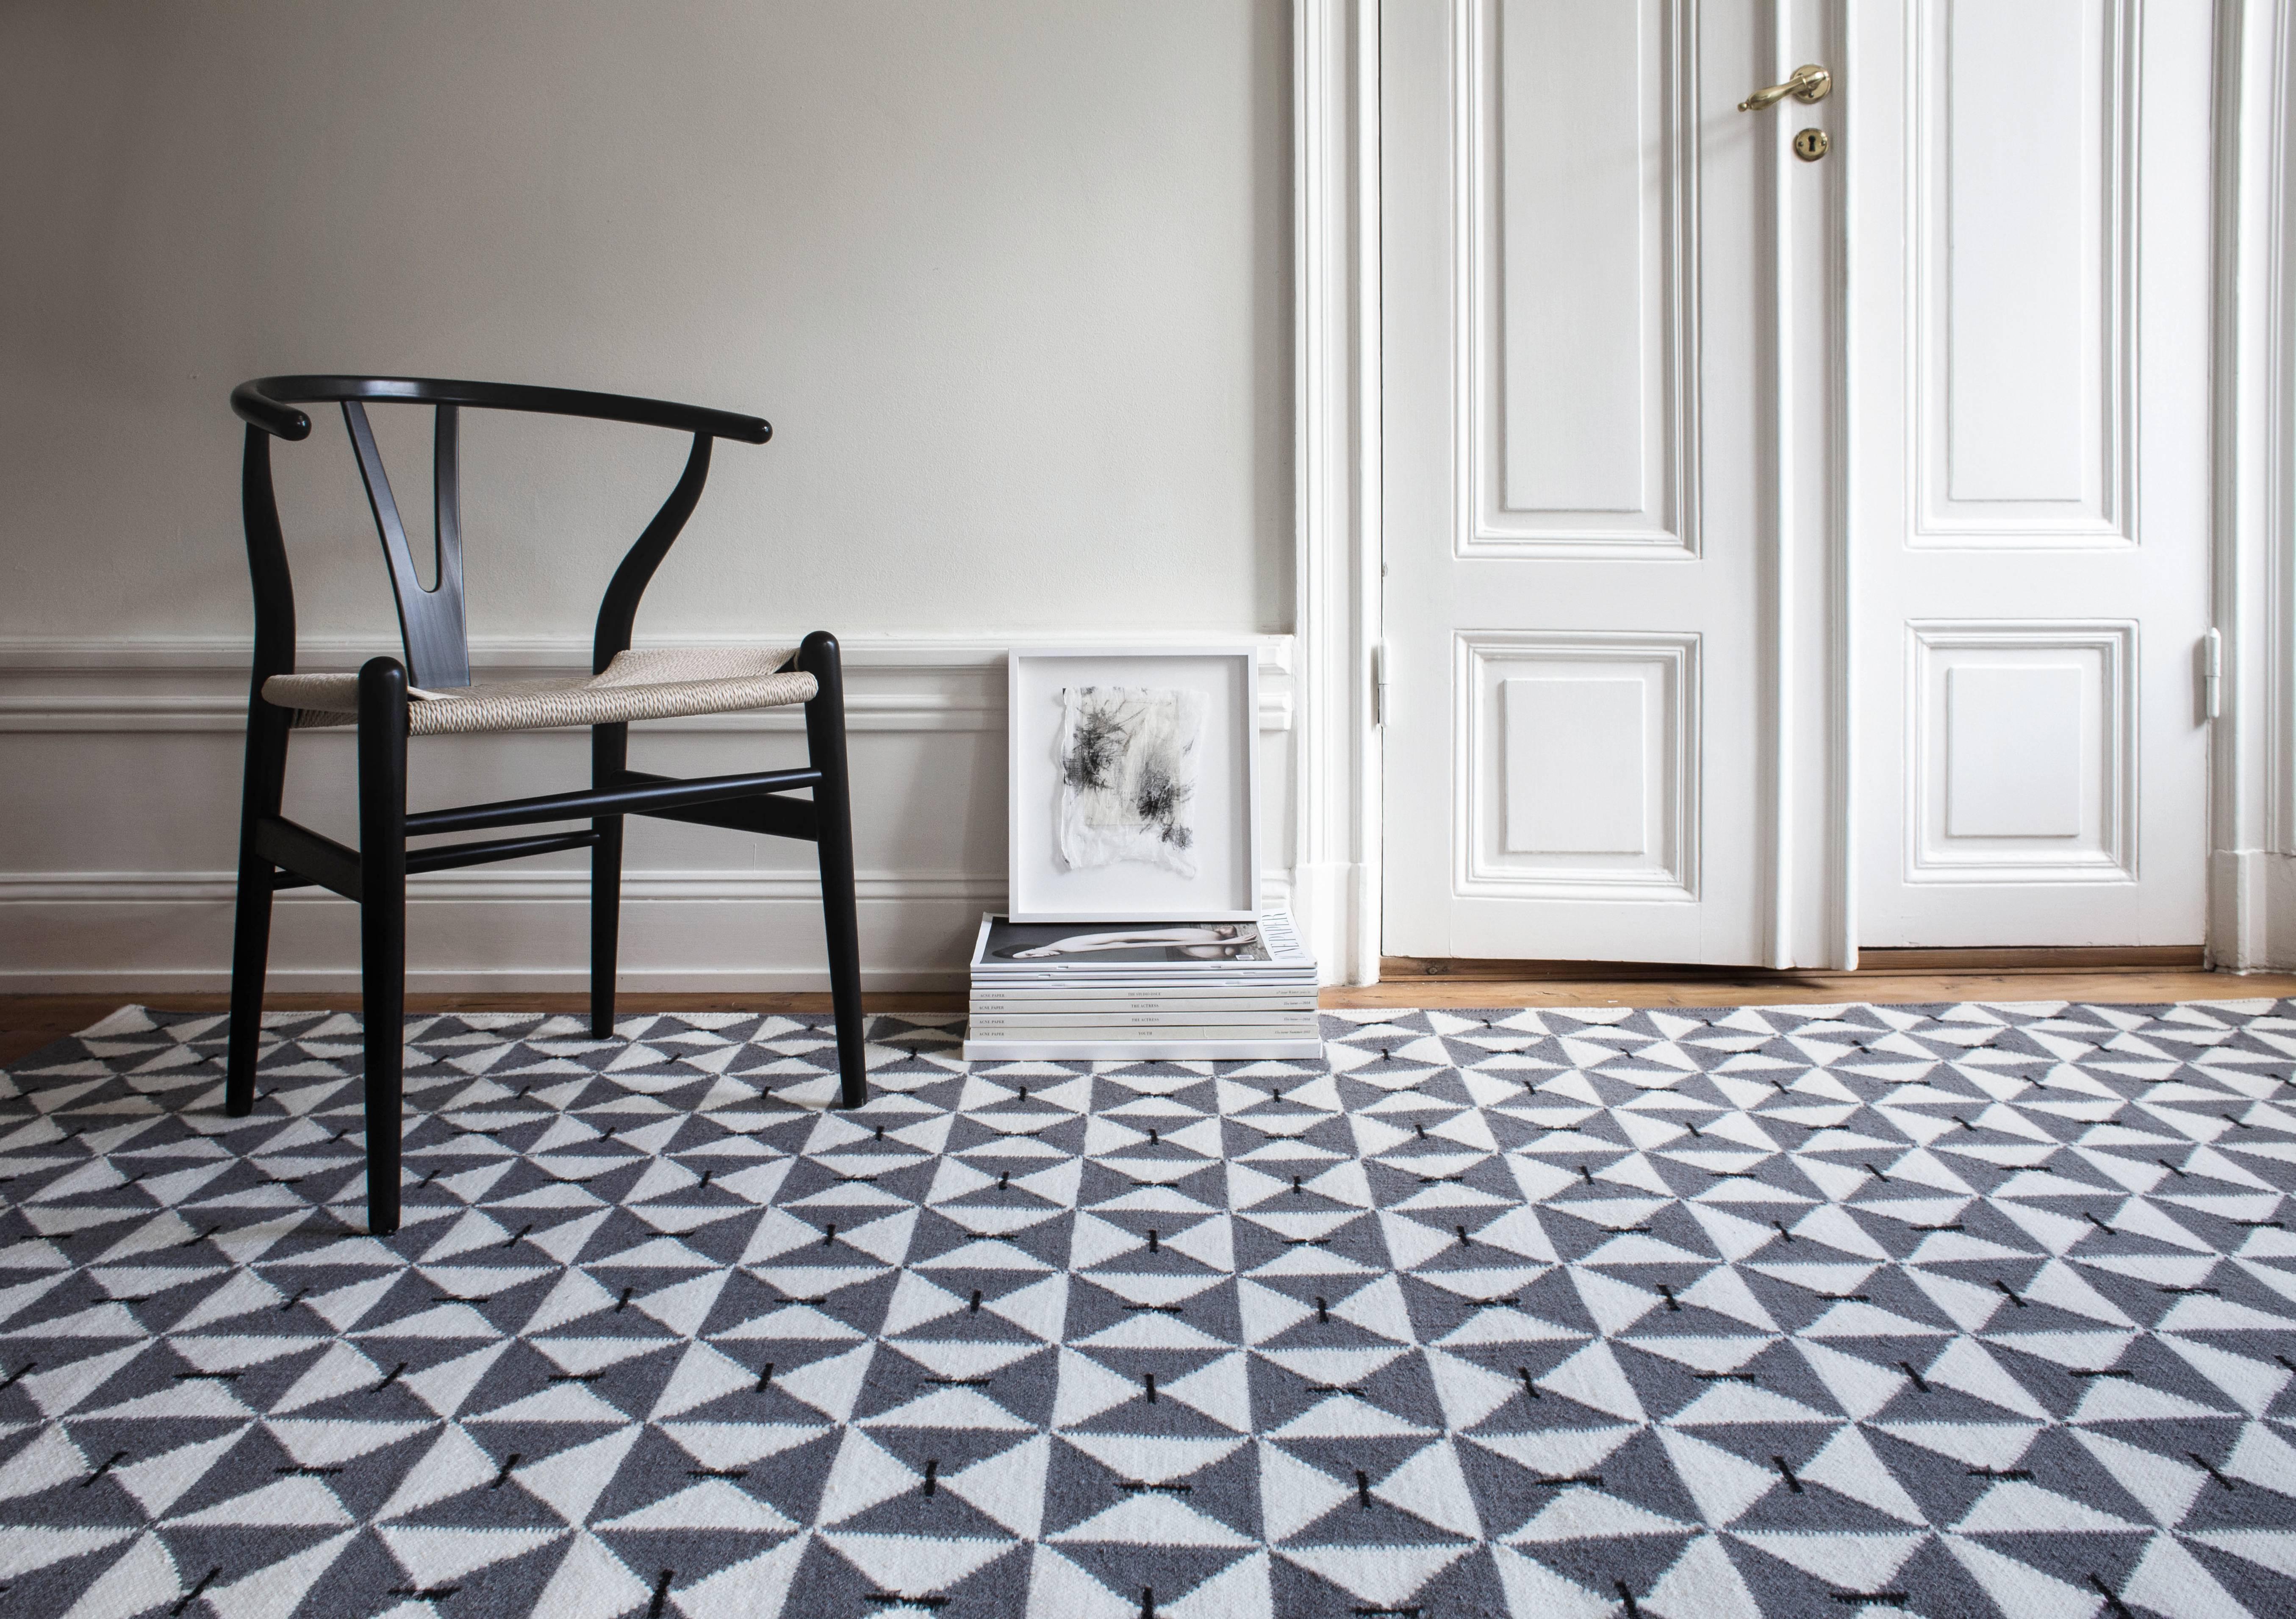 Classic geometry interpreted in a contemporary and playful way. A striking Scandinavian design that gives any room new life. 

This modern flat-weave Dhurrie or Kilim rug, 